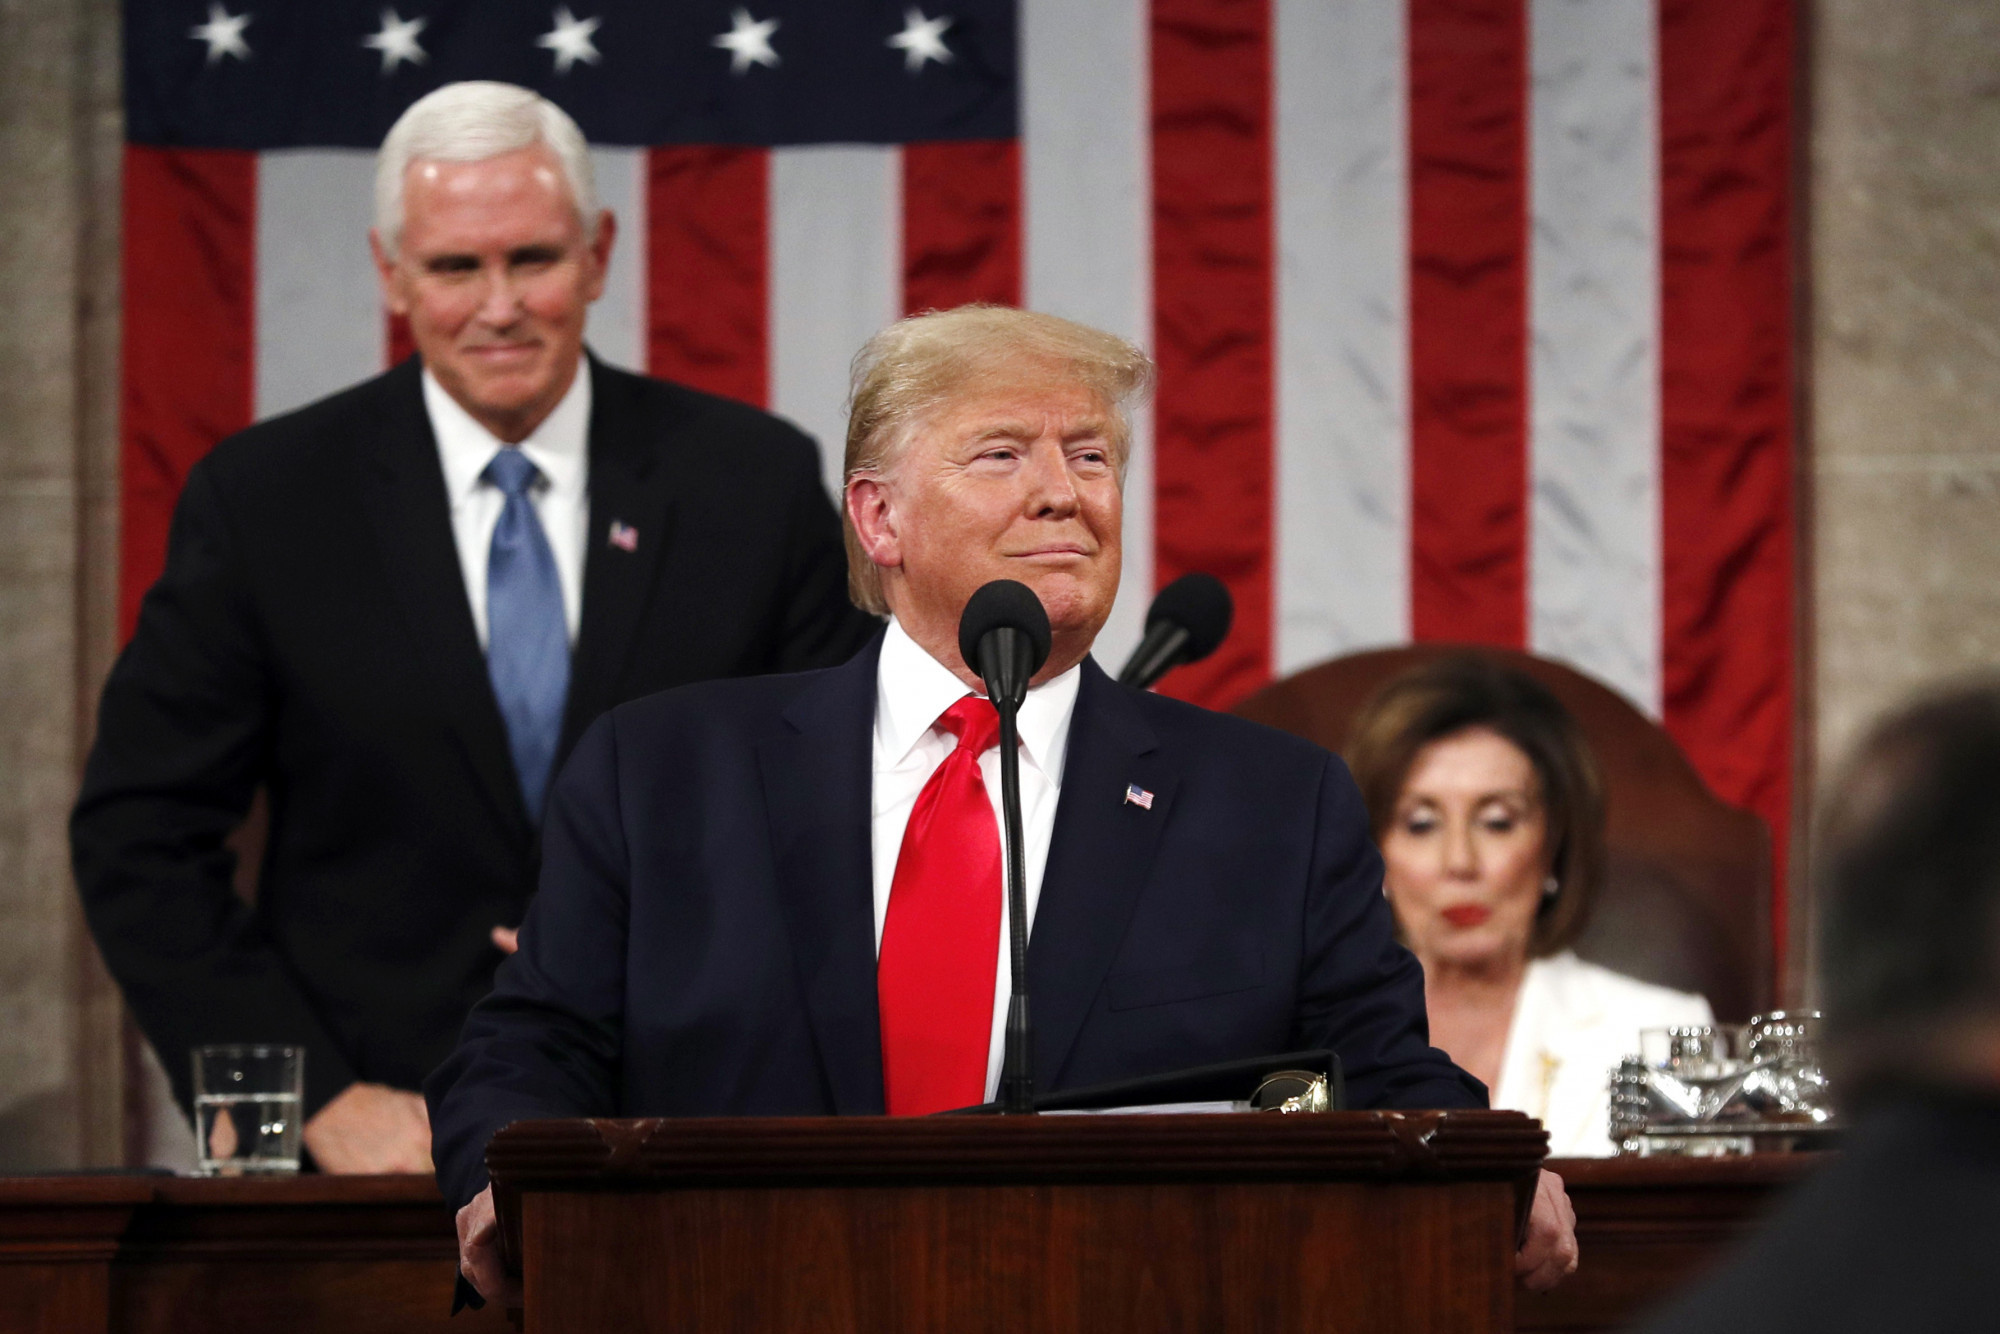 Live: Trump Delivers State of the Union Address